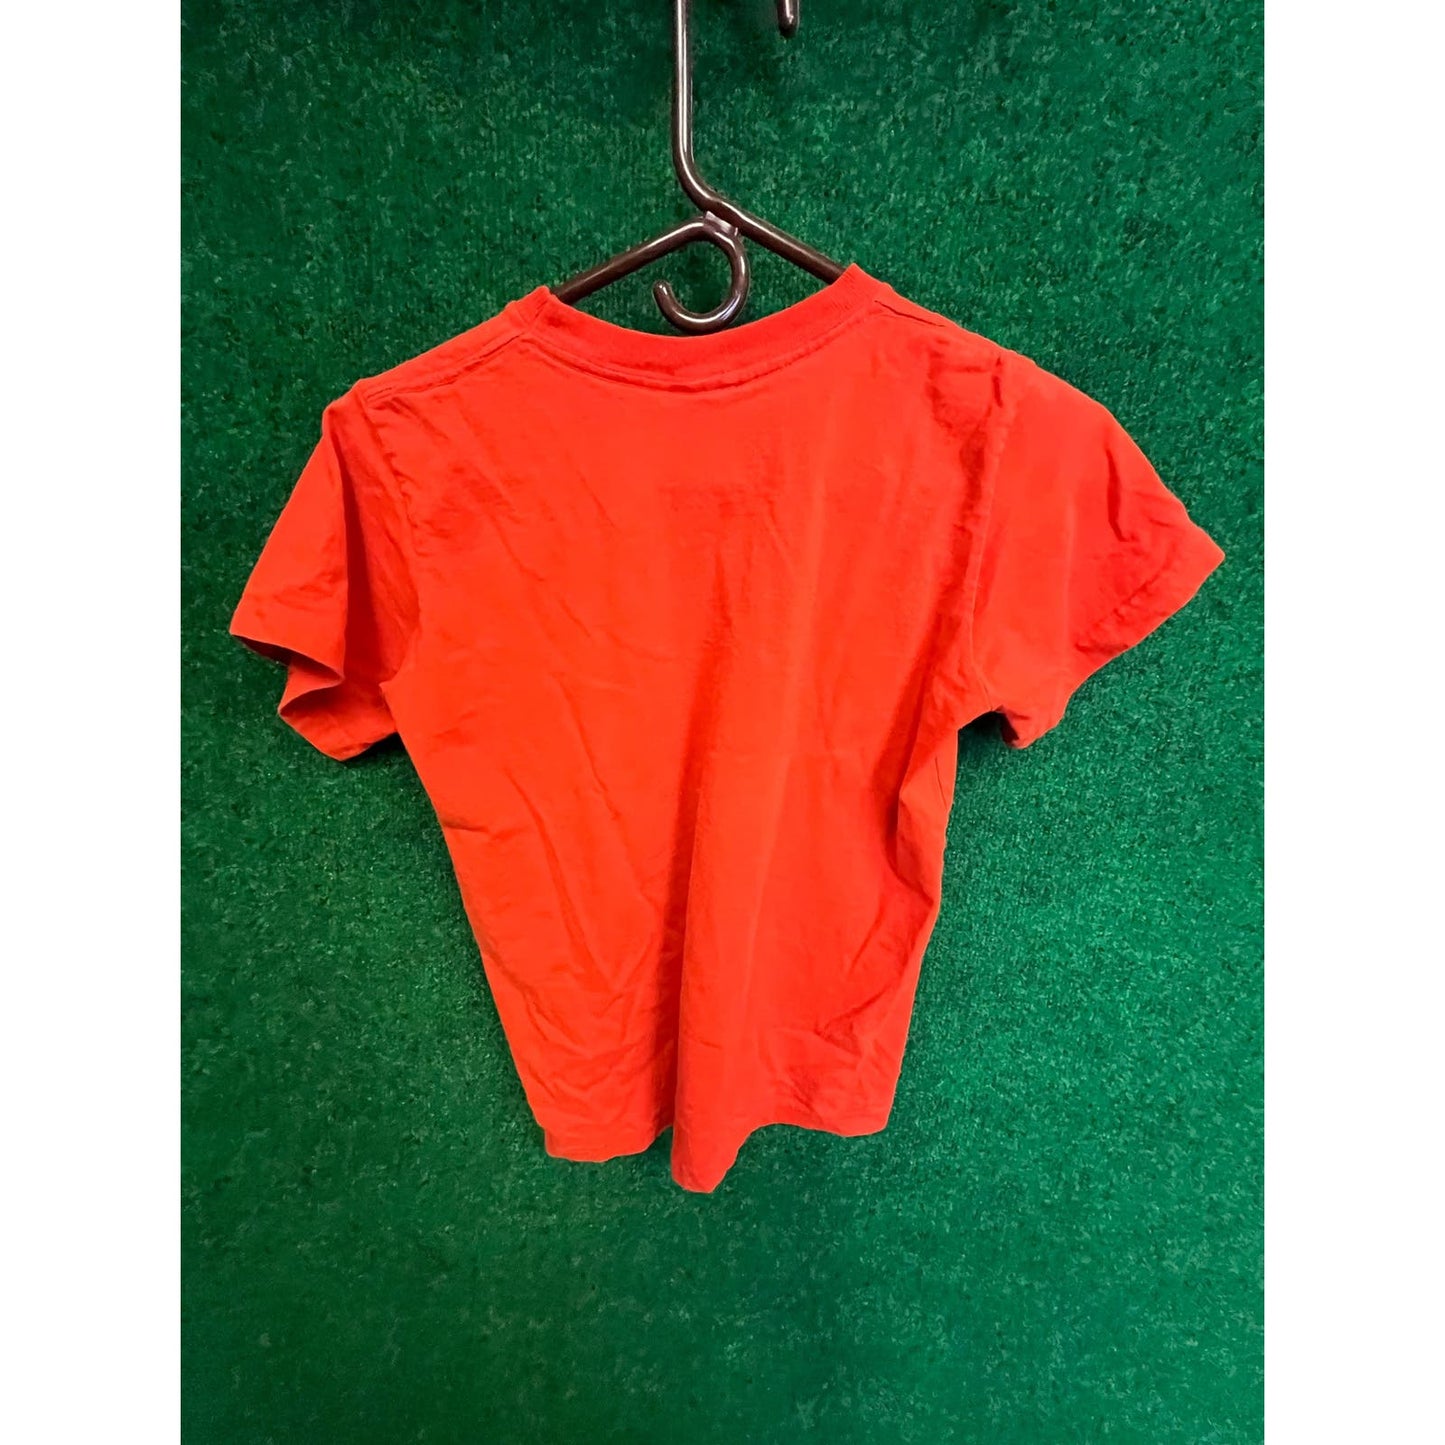 Y2K Lady's Bucknell University XS Extra Small Orange T-shirt (See Measurements)